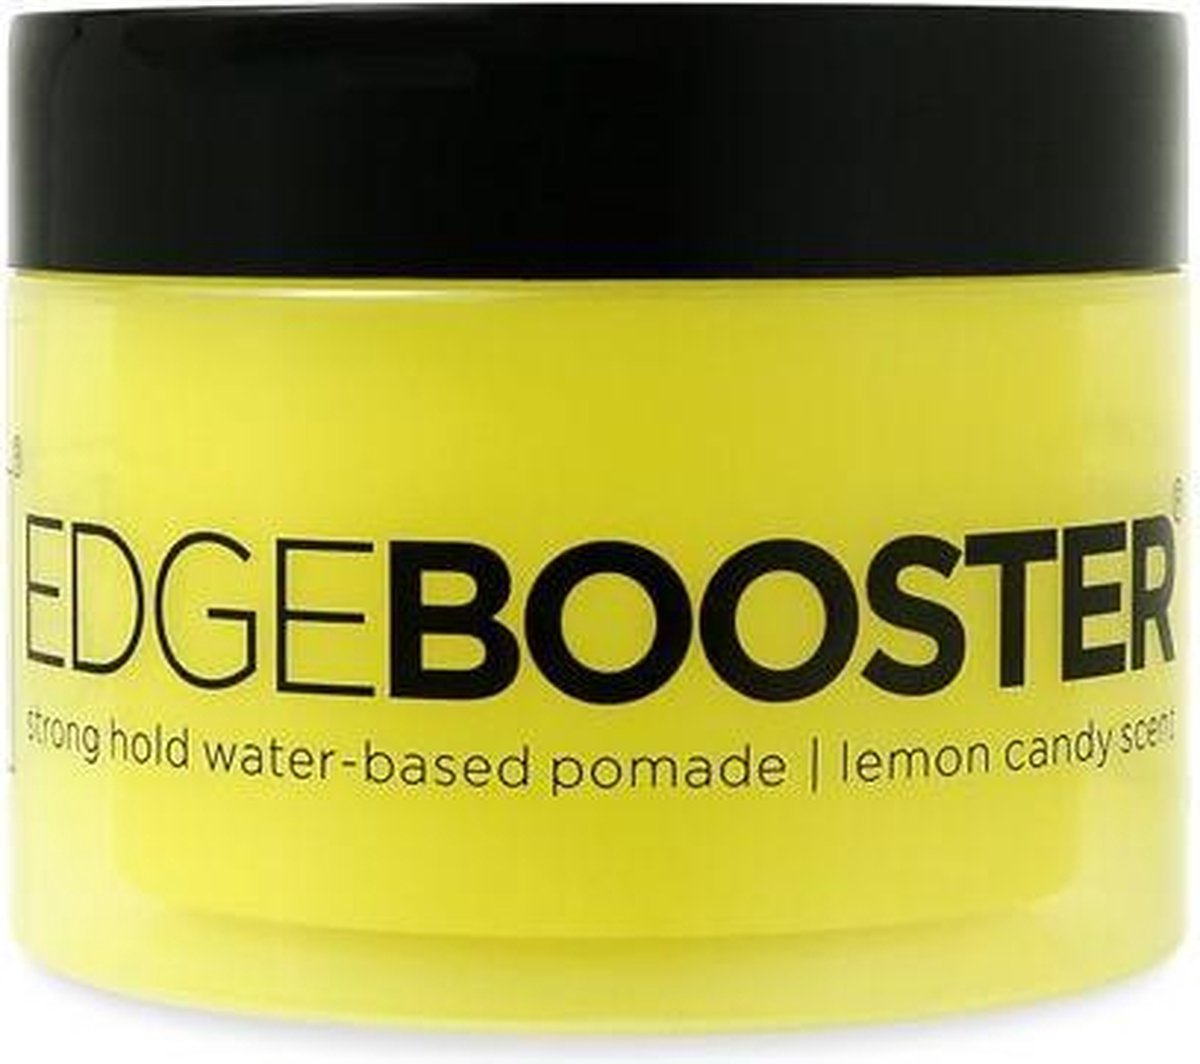 Style Factor Edge Booster Pomade Lemon Candy 3.38oz